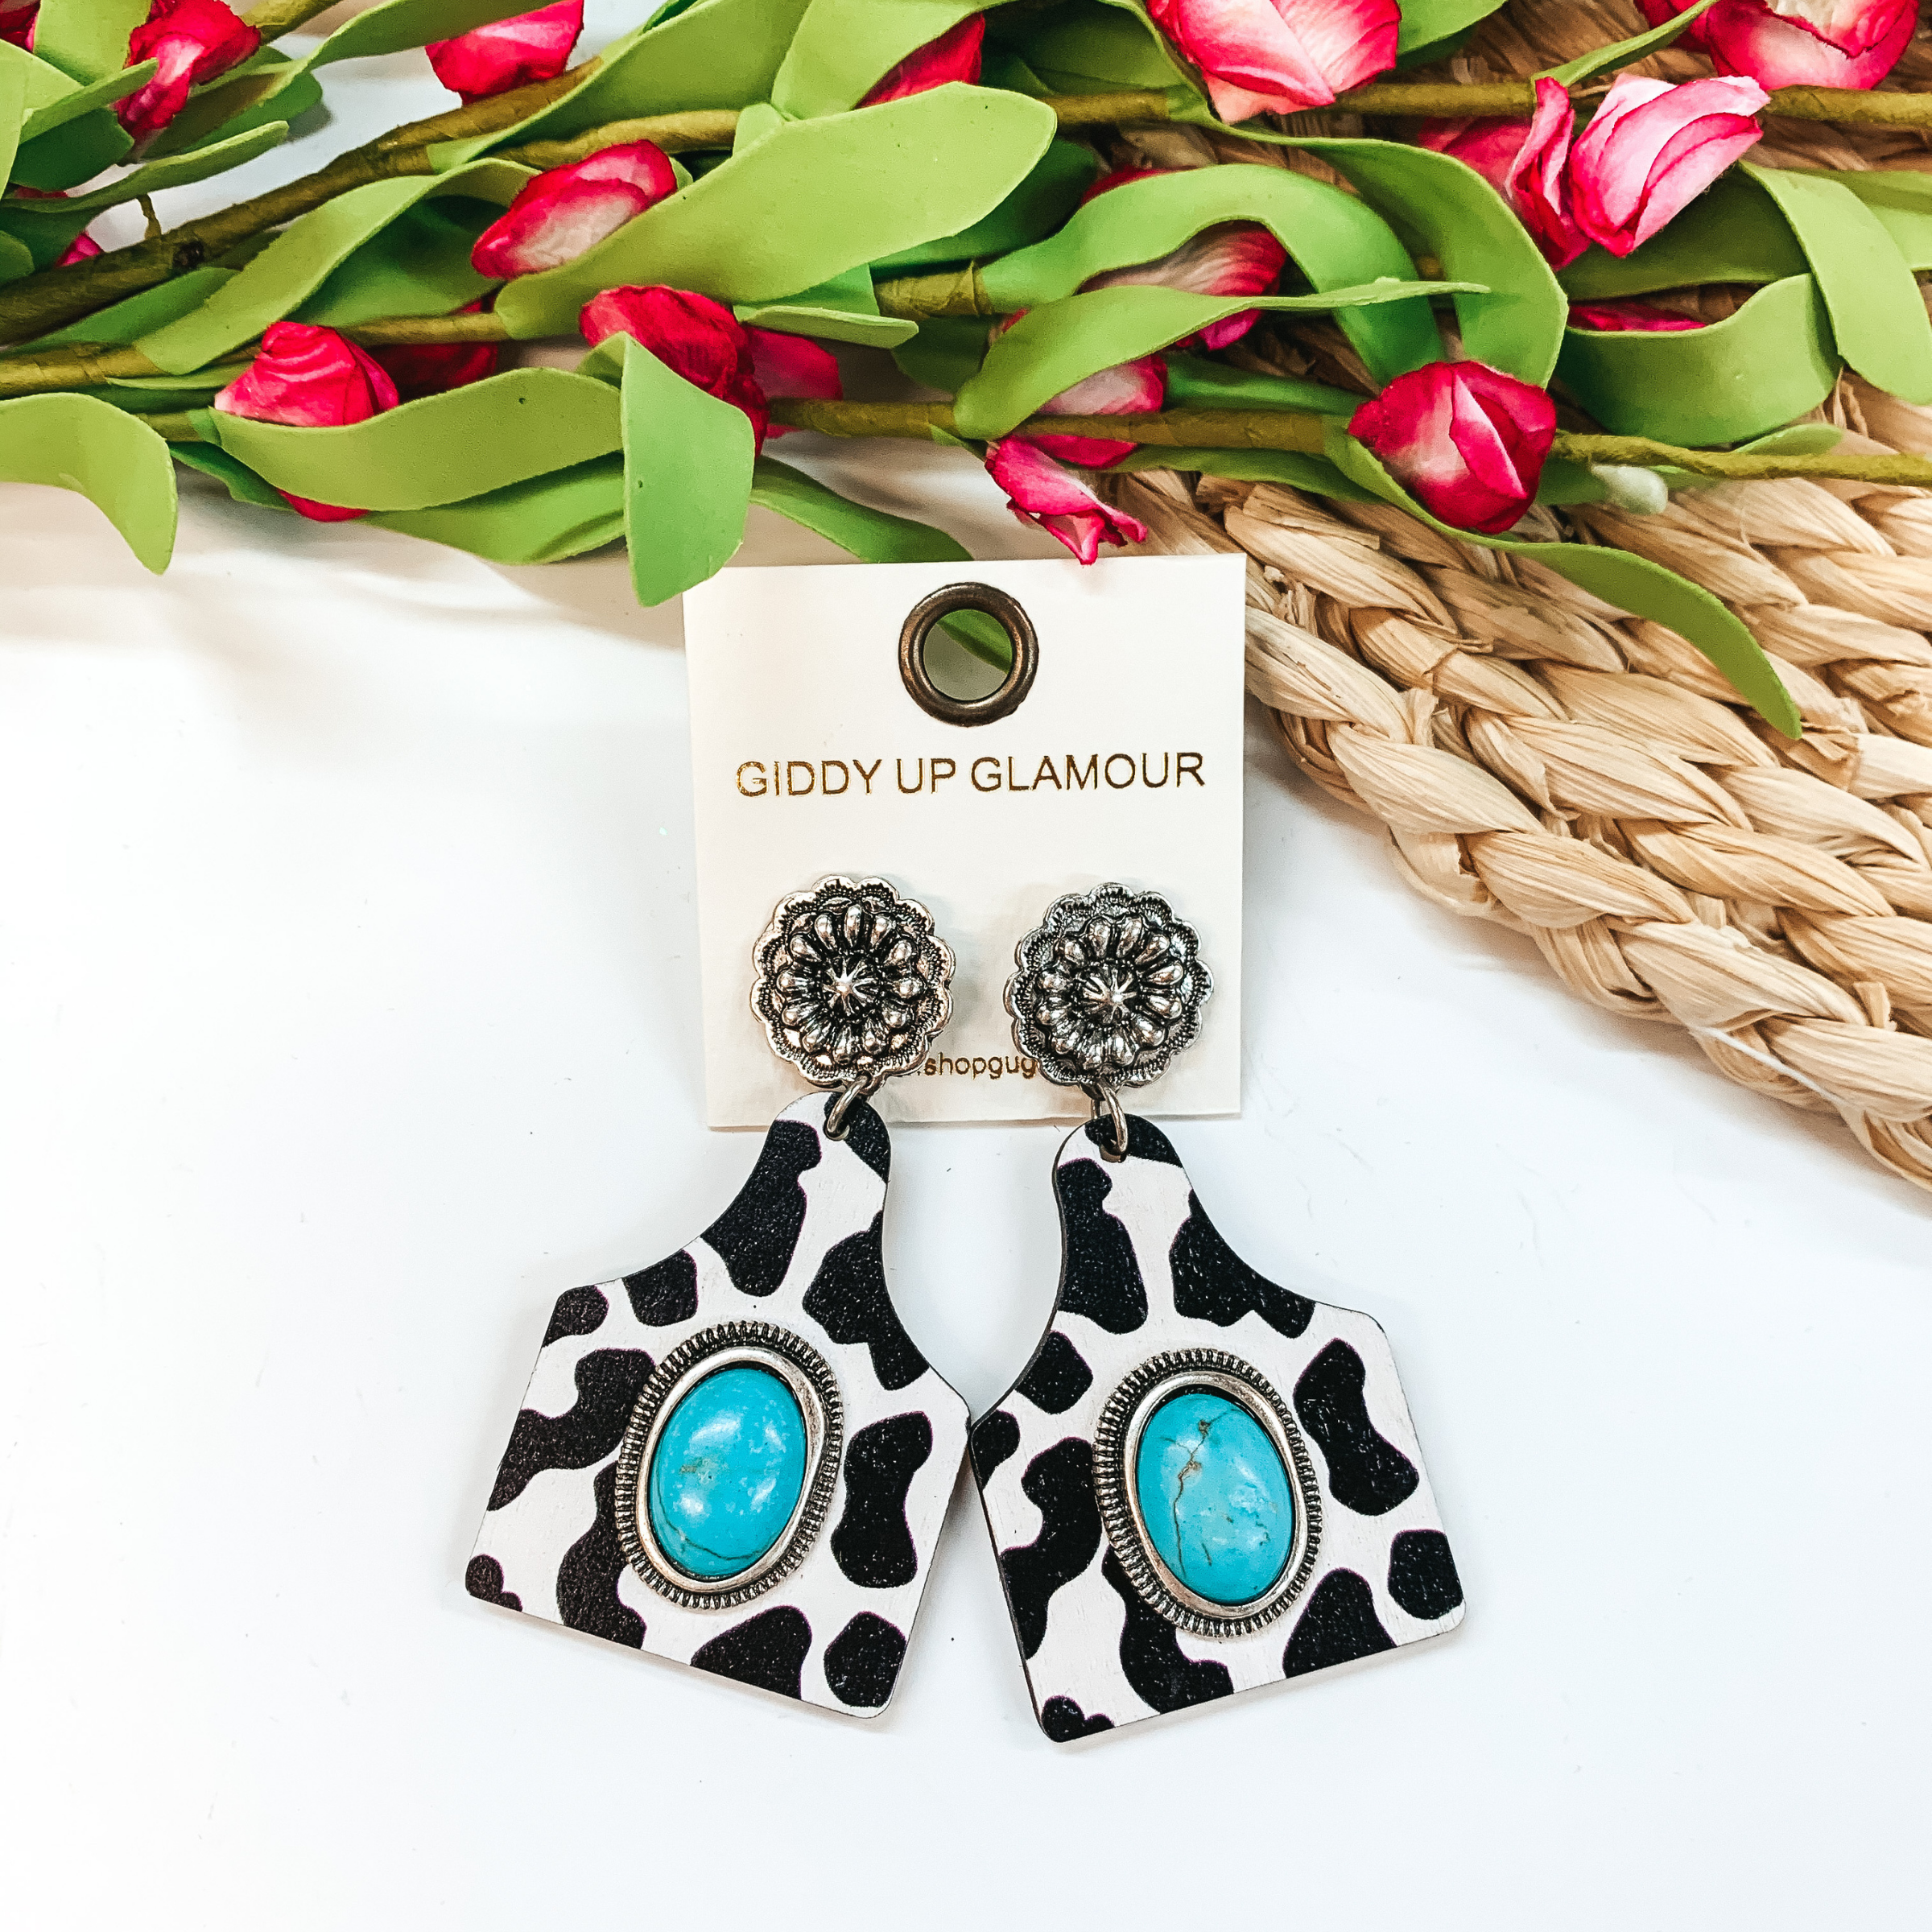 Silver concho flower post back earrings with a hanging cow tag pendant. The pendant has a printed black and white cow print design with a oval turquoise stone. These earrings are pictured on a white background with pink flowers at the top.